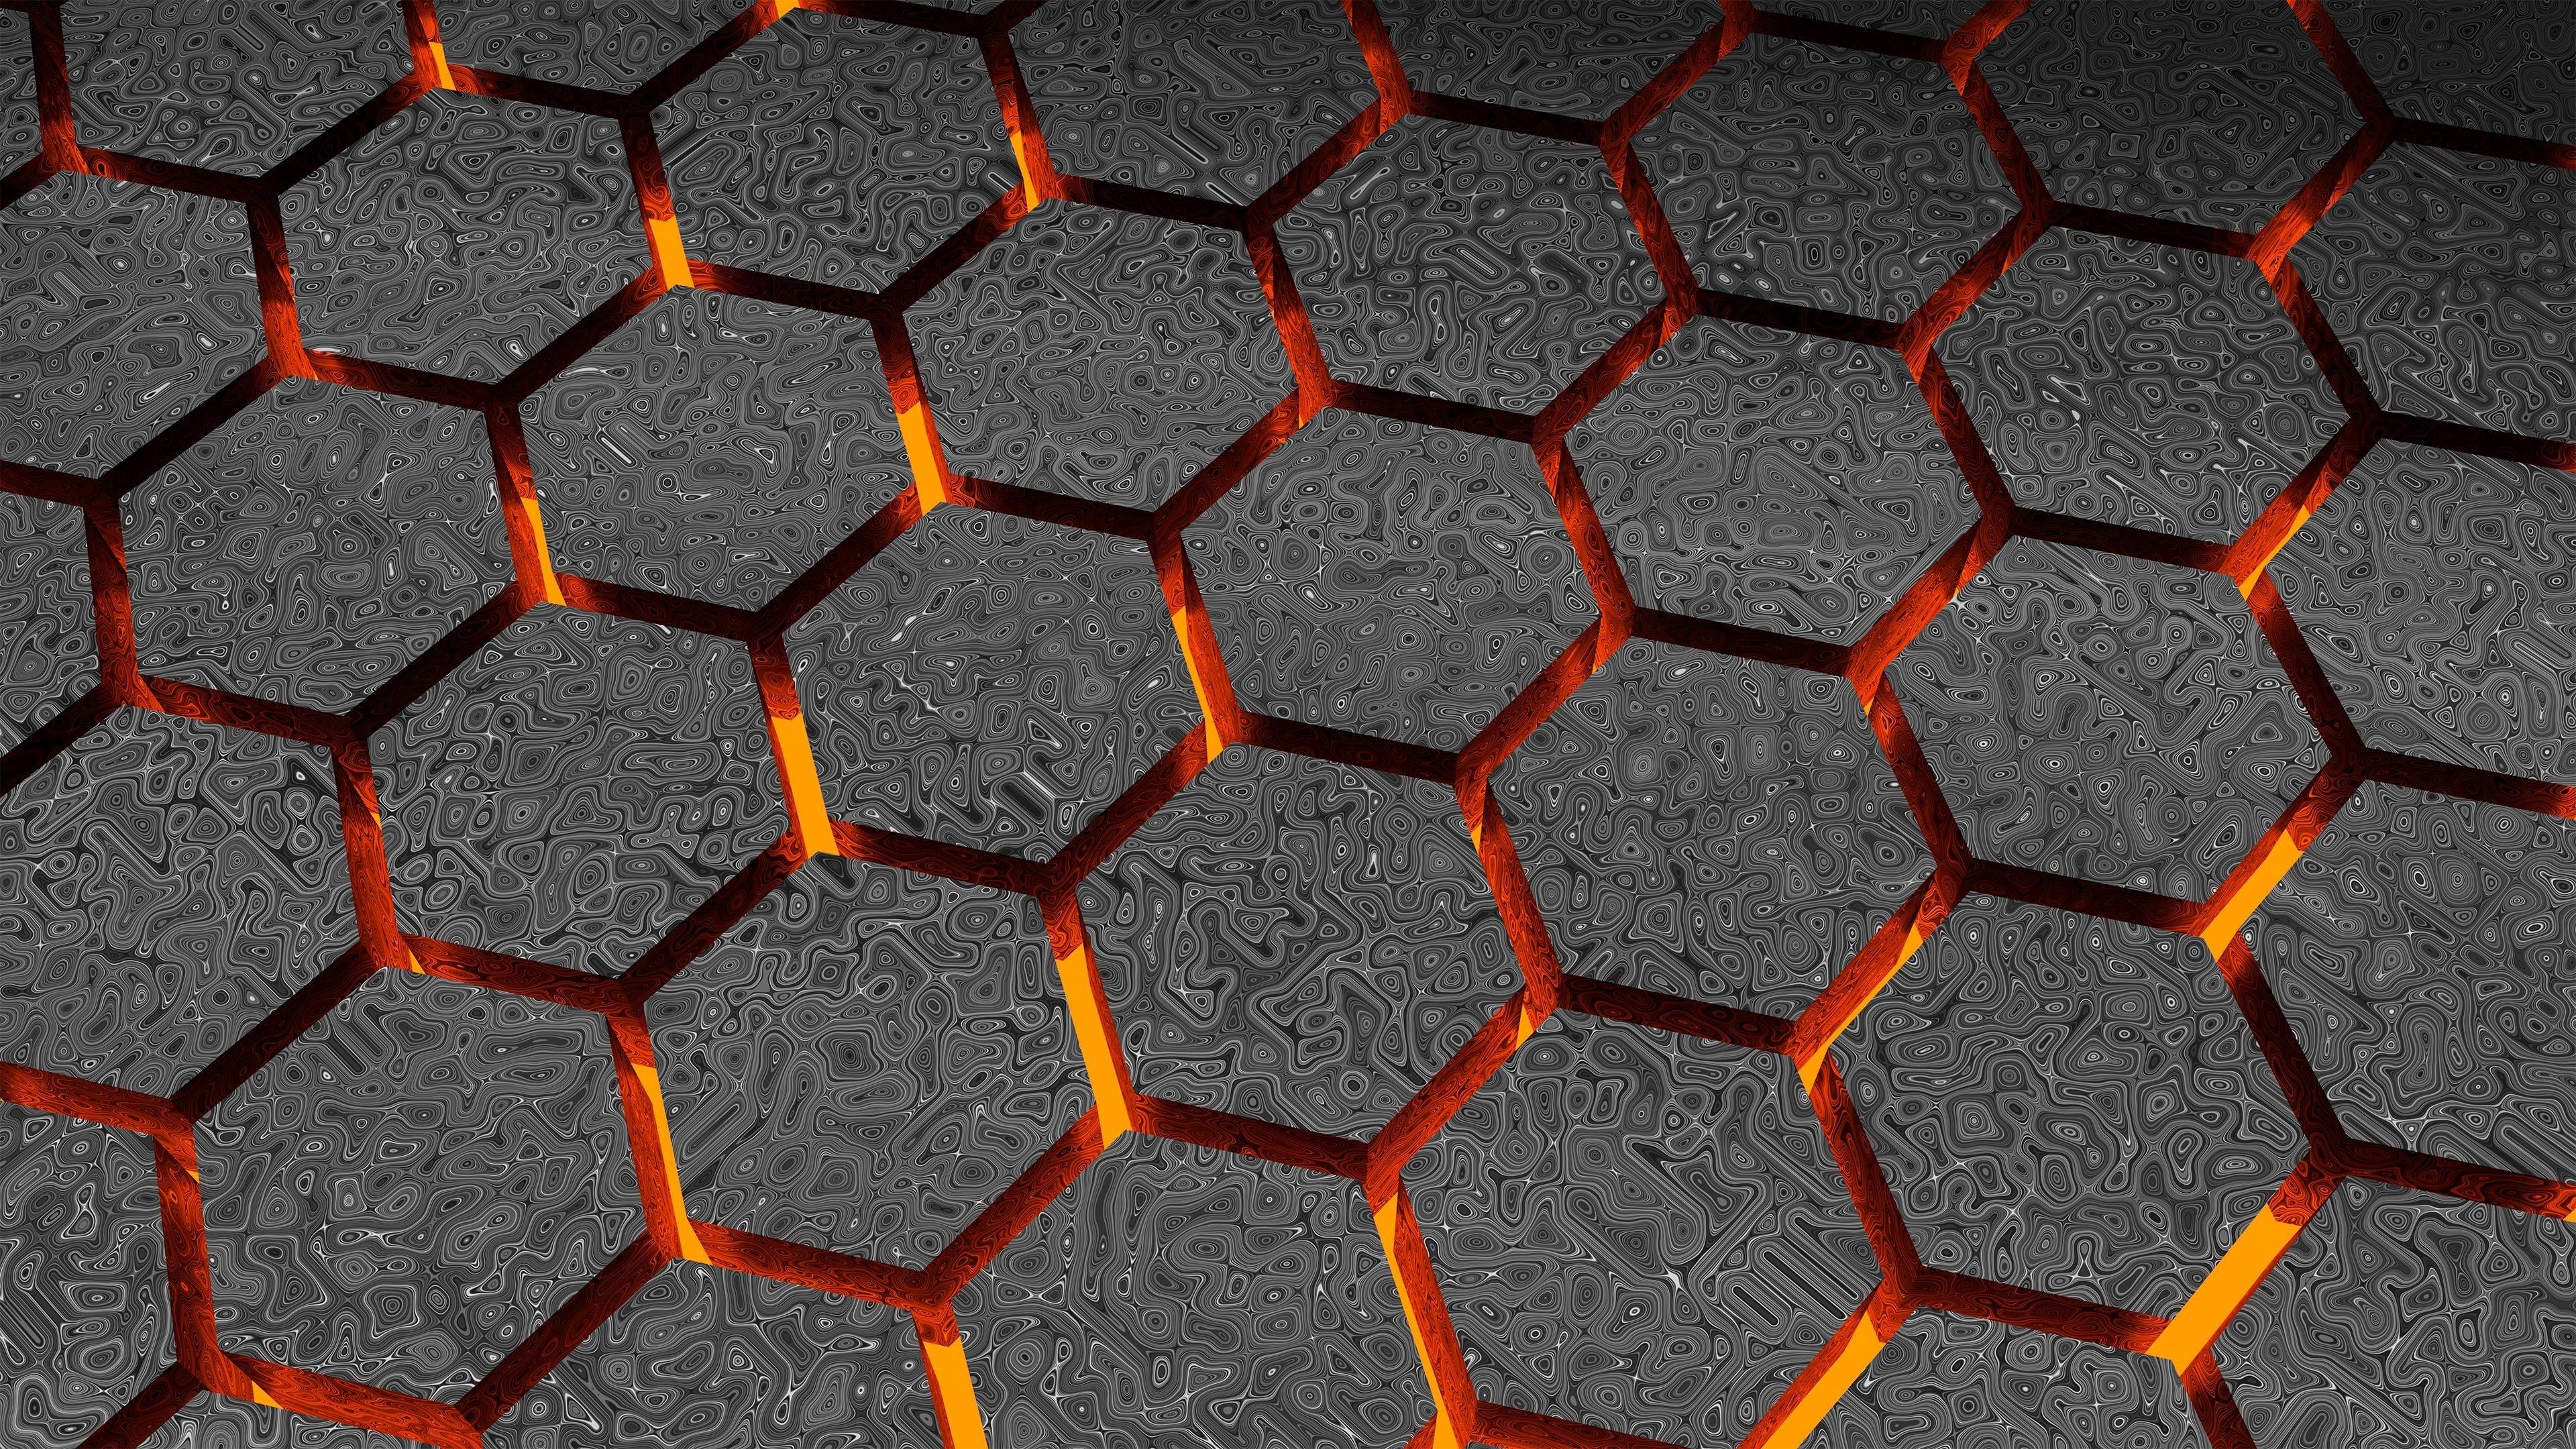 Download 3840x2160 Wallpaper Pattern, Abstract, Glowing Hexagons, 4k